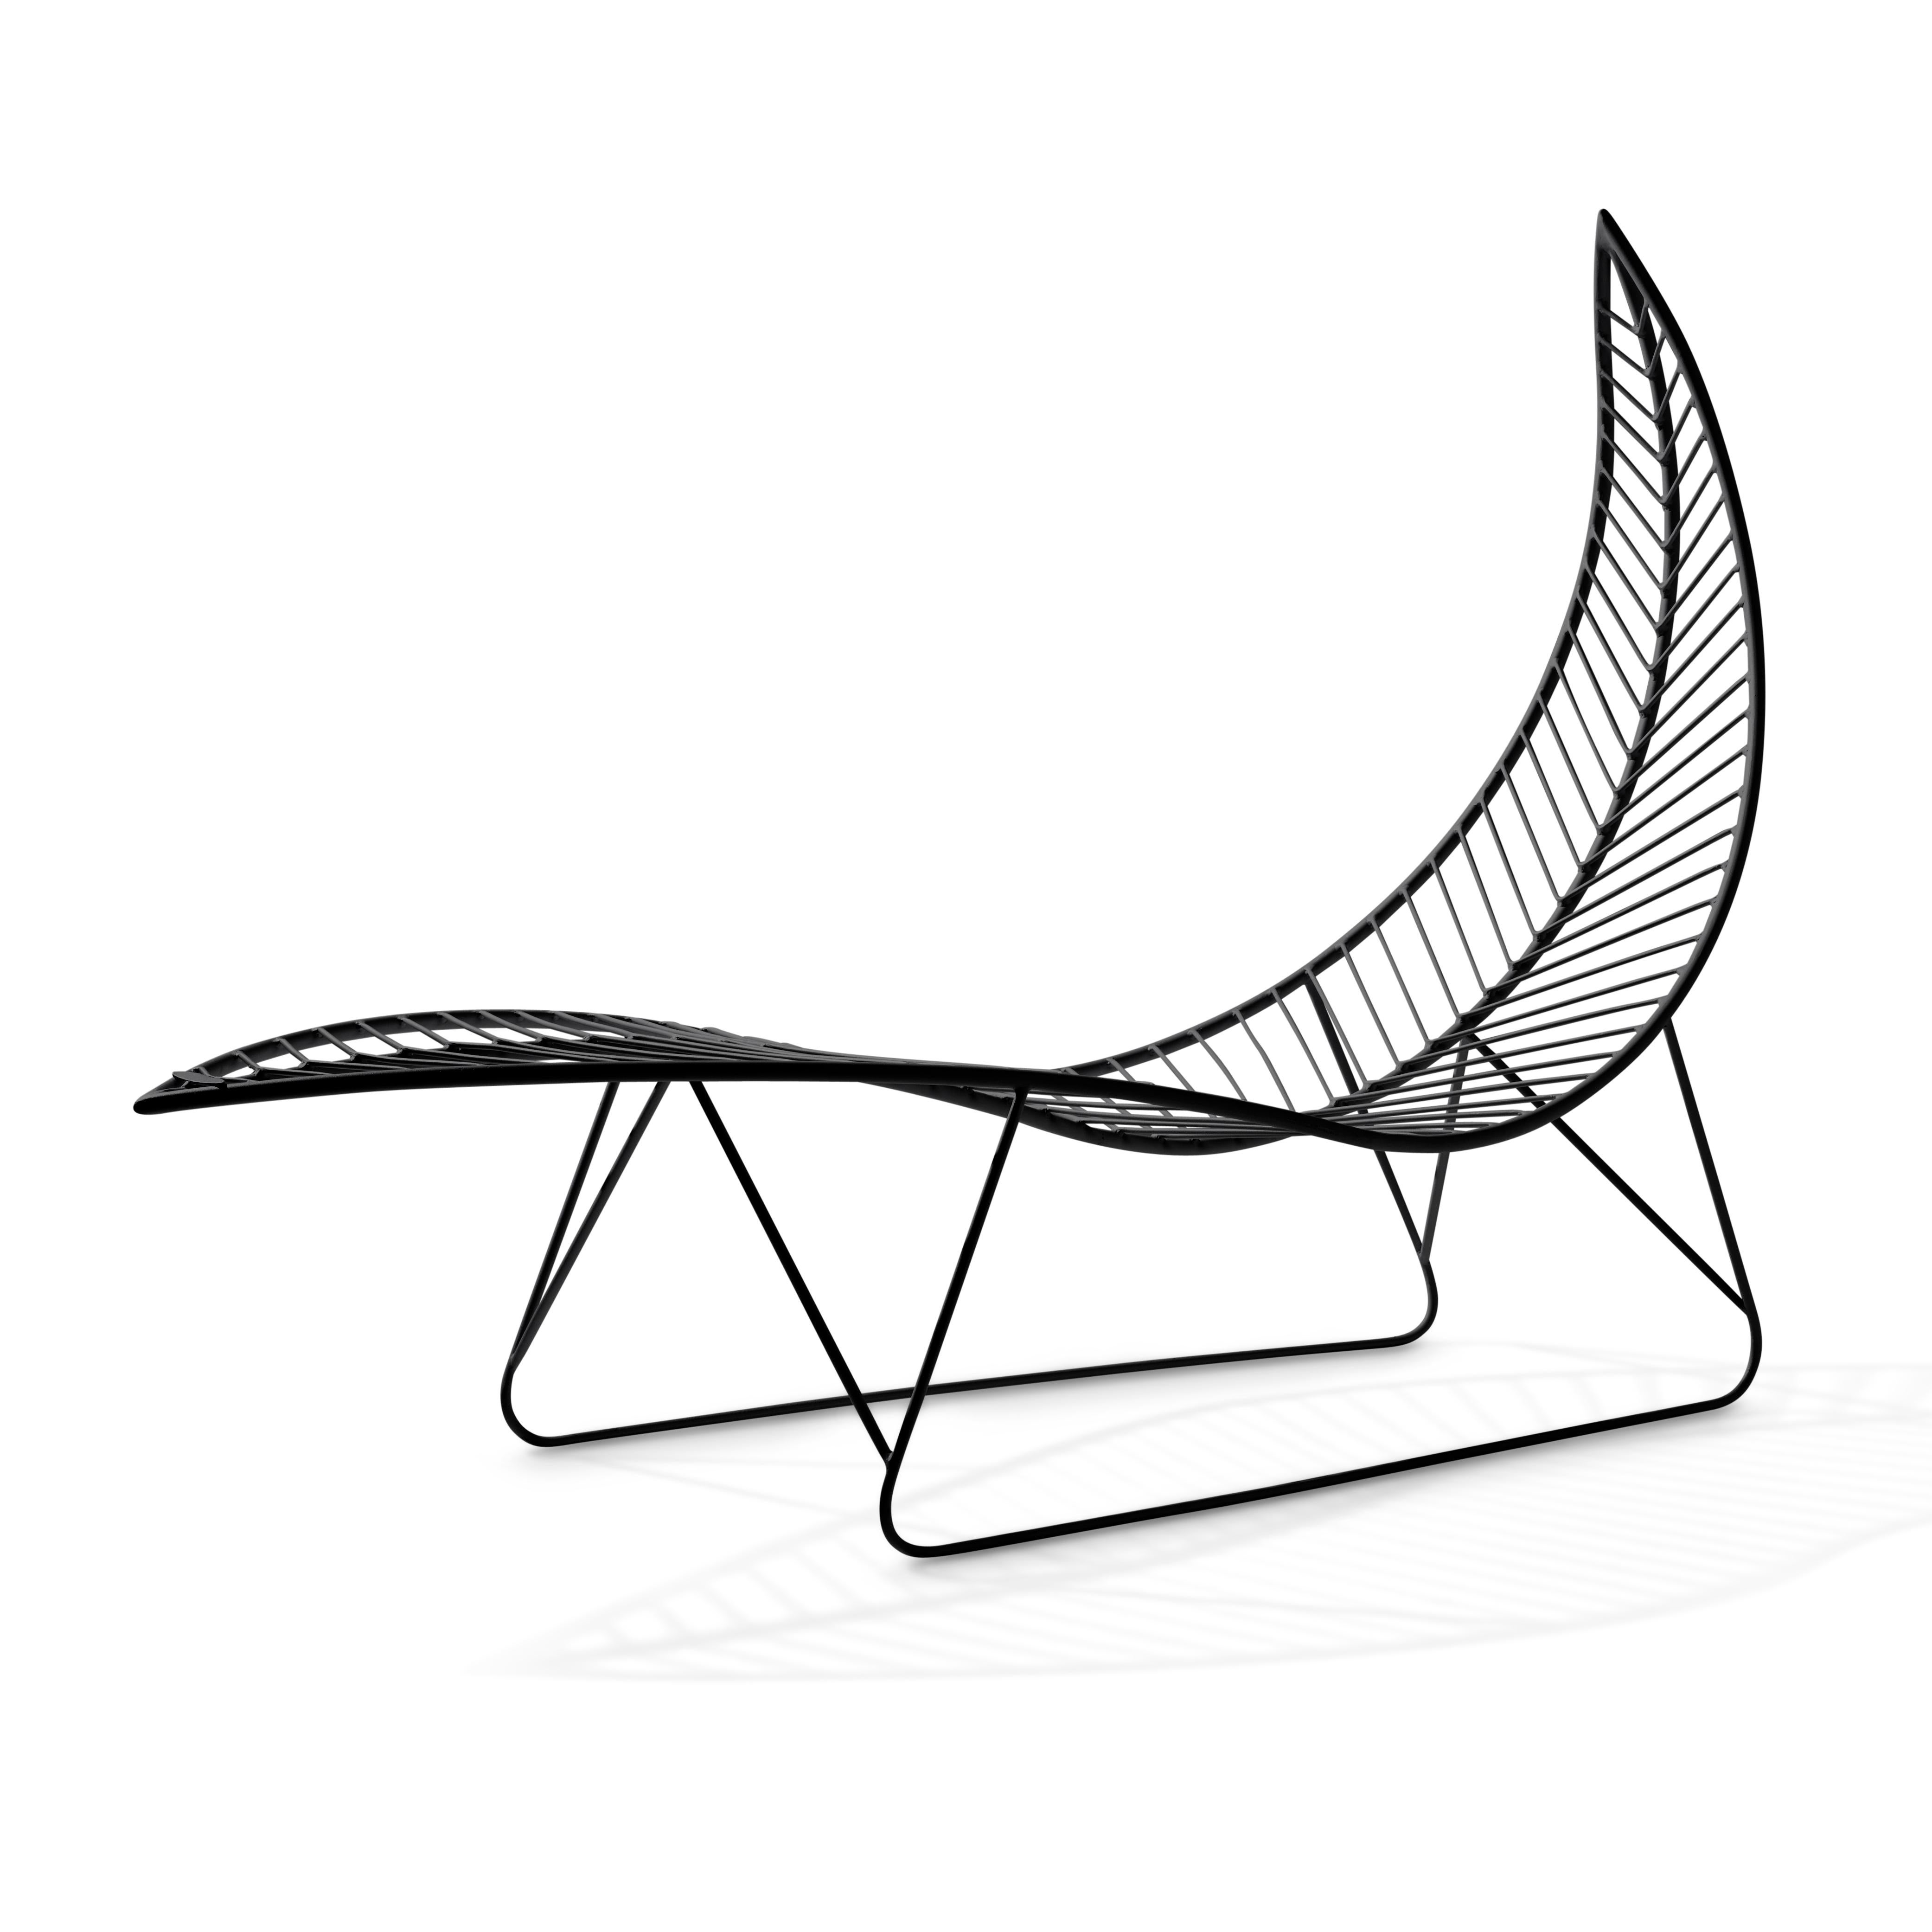 The LEAF hanging swing chair is fluid and organic. The chair is inspired by nature and is reminiscent of organic leaf shapes with its veins flowing out from the centre. It is simple and striking in its visual appeal.

The chair has been designed